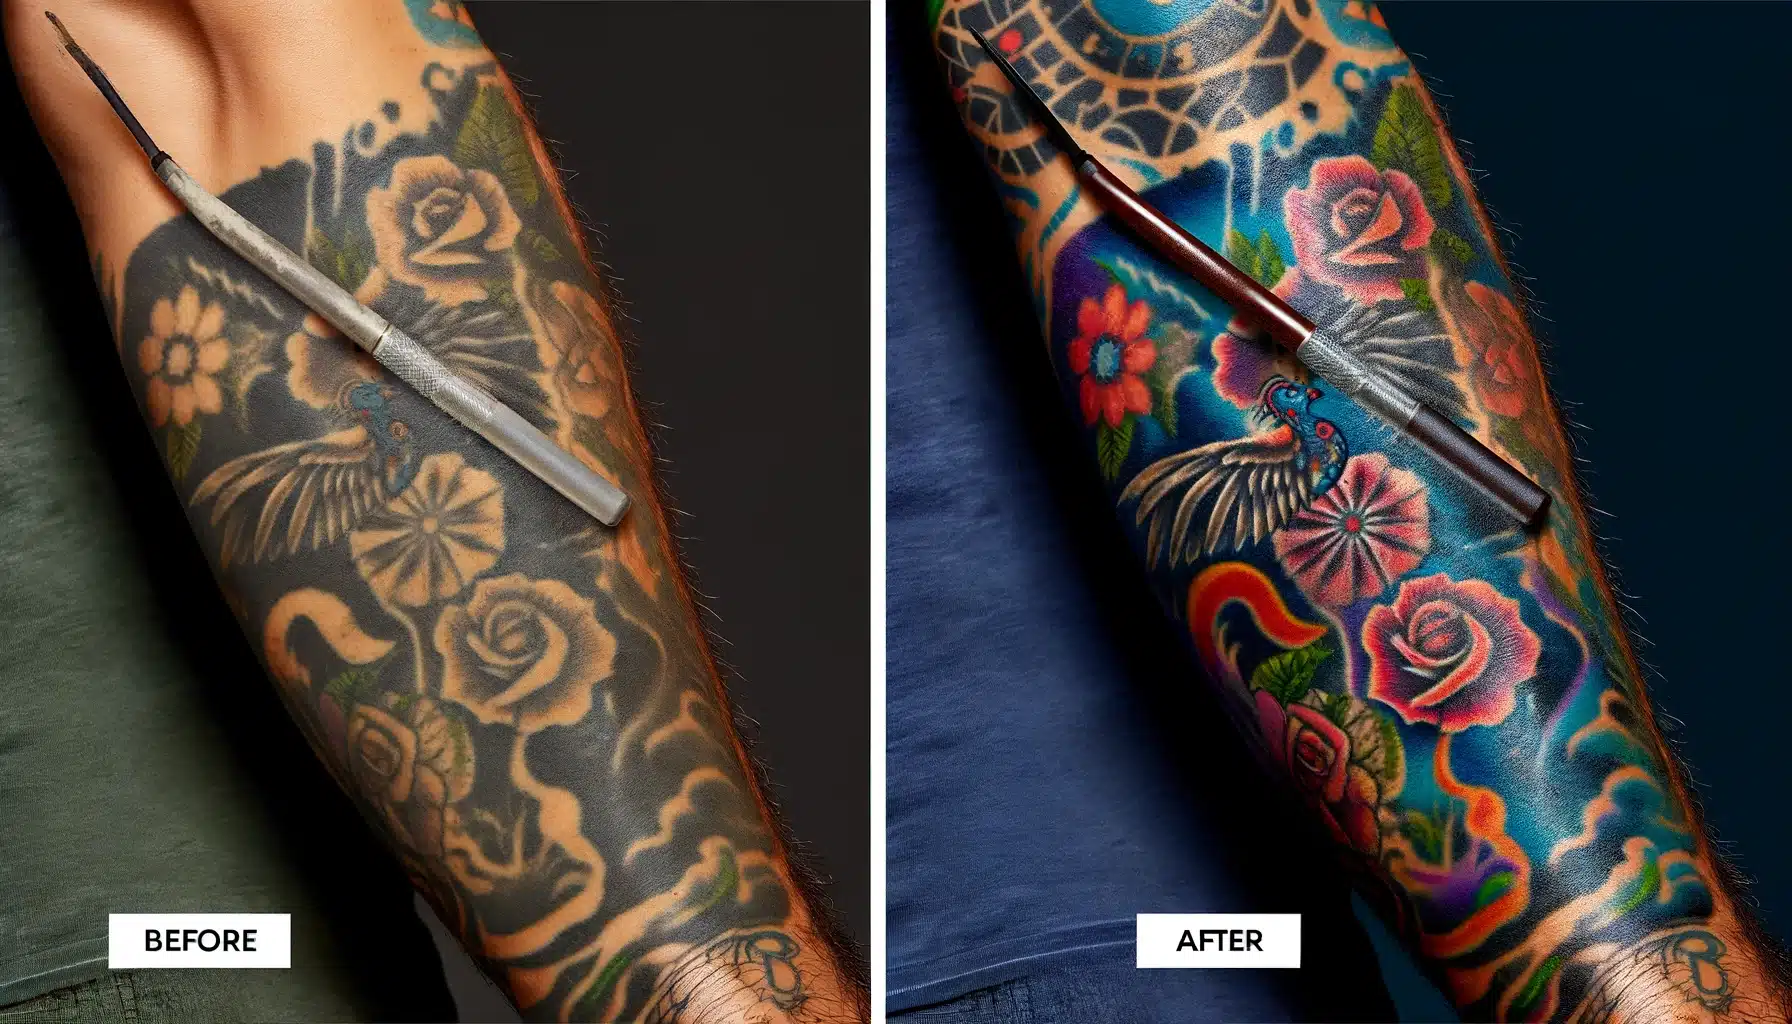 Before-and-after Software modification on an arm tattoo, showing faded colors becoming vibrant and details sharpened.